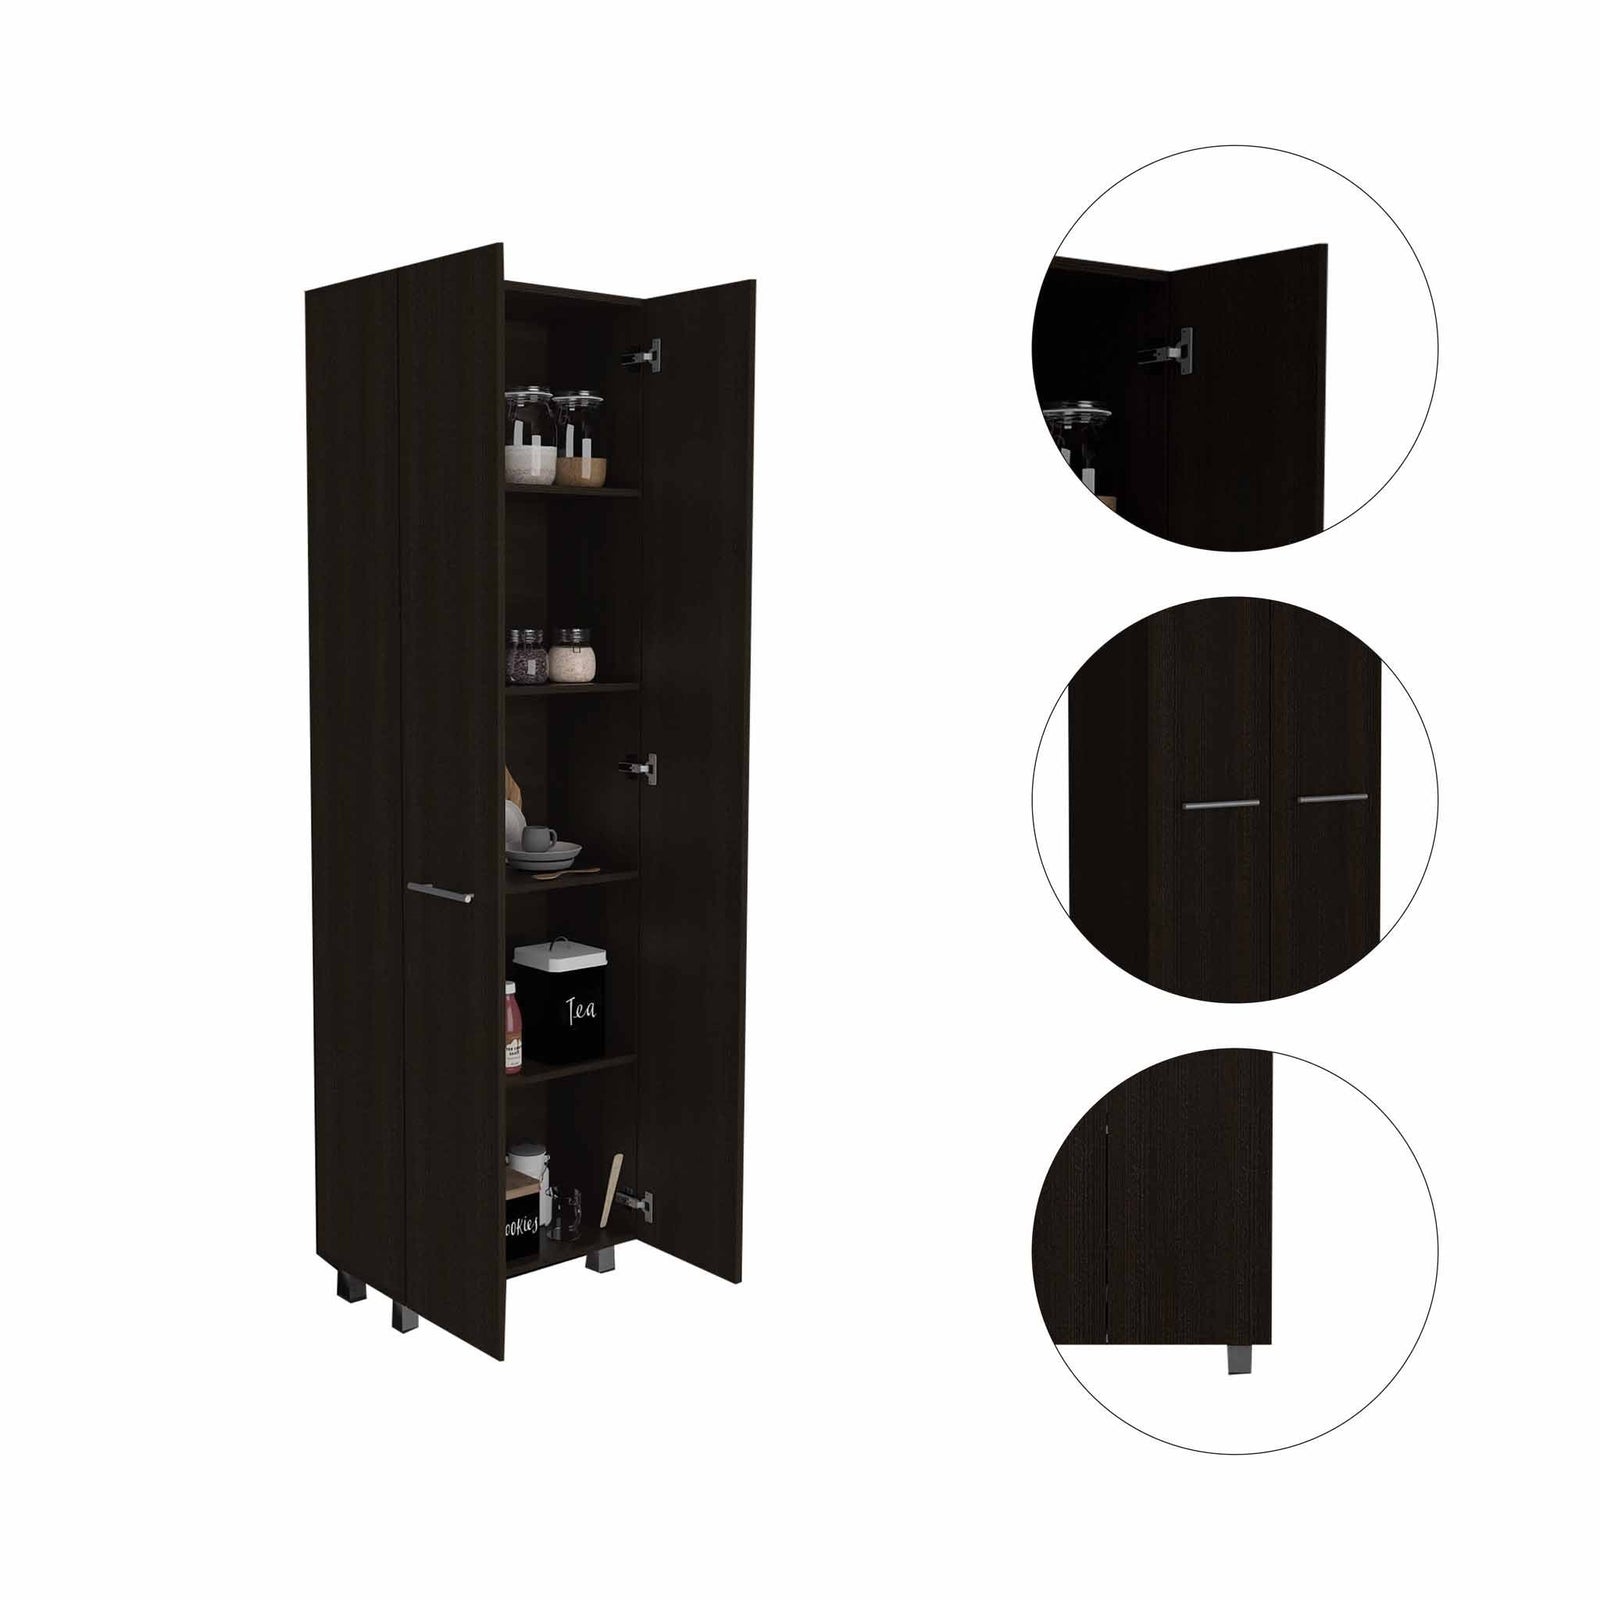 78" Modern Black Pantry Cabinet with Two Full Size Doors